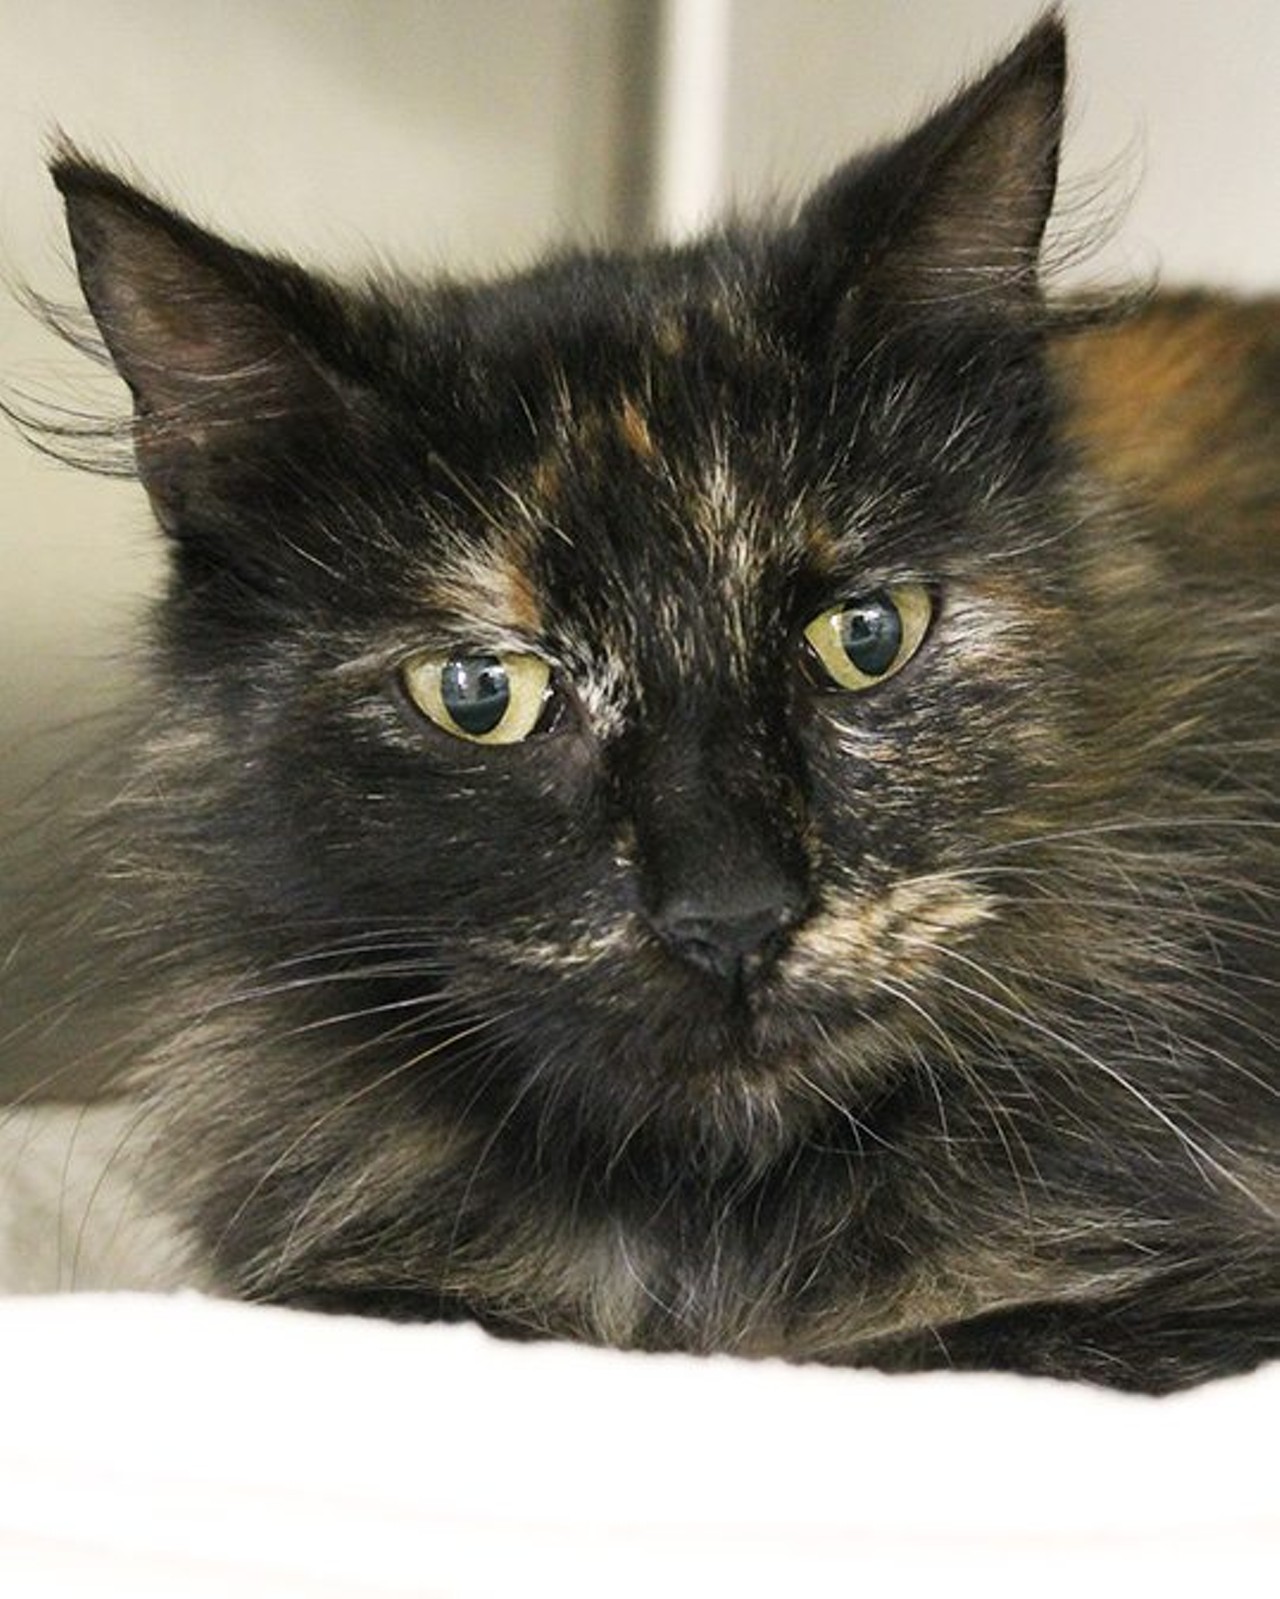 Whispers
"I&#146;m a playful kitty with a beautiful fluffy tortoiseshell coat. Don&#146;t let my serious stare fool you, I&#146;m actually very friendly and sweet. You should visit me in the cattery to see for yourself. I&#146;m searching for a forever home and hope that it can be with you!"